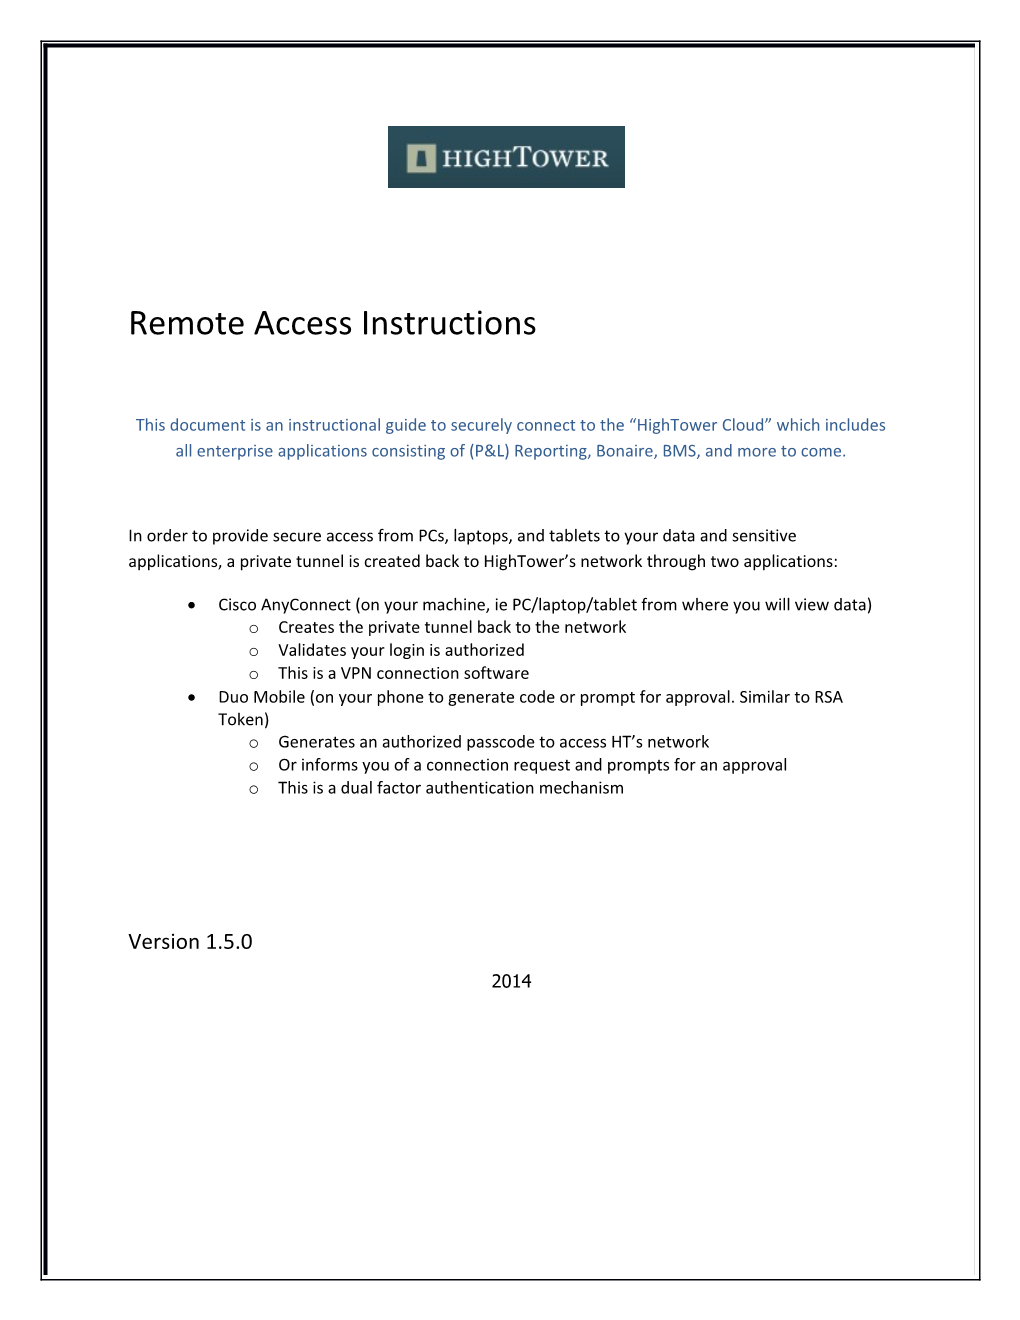 Remote Access Instructions